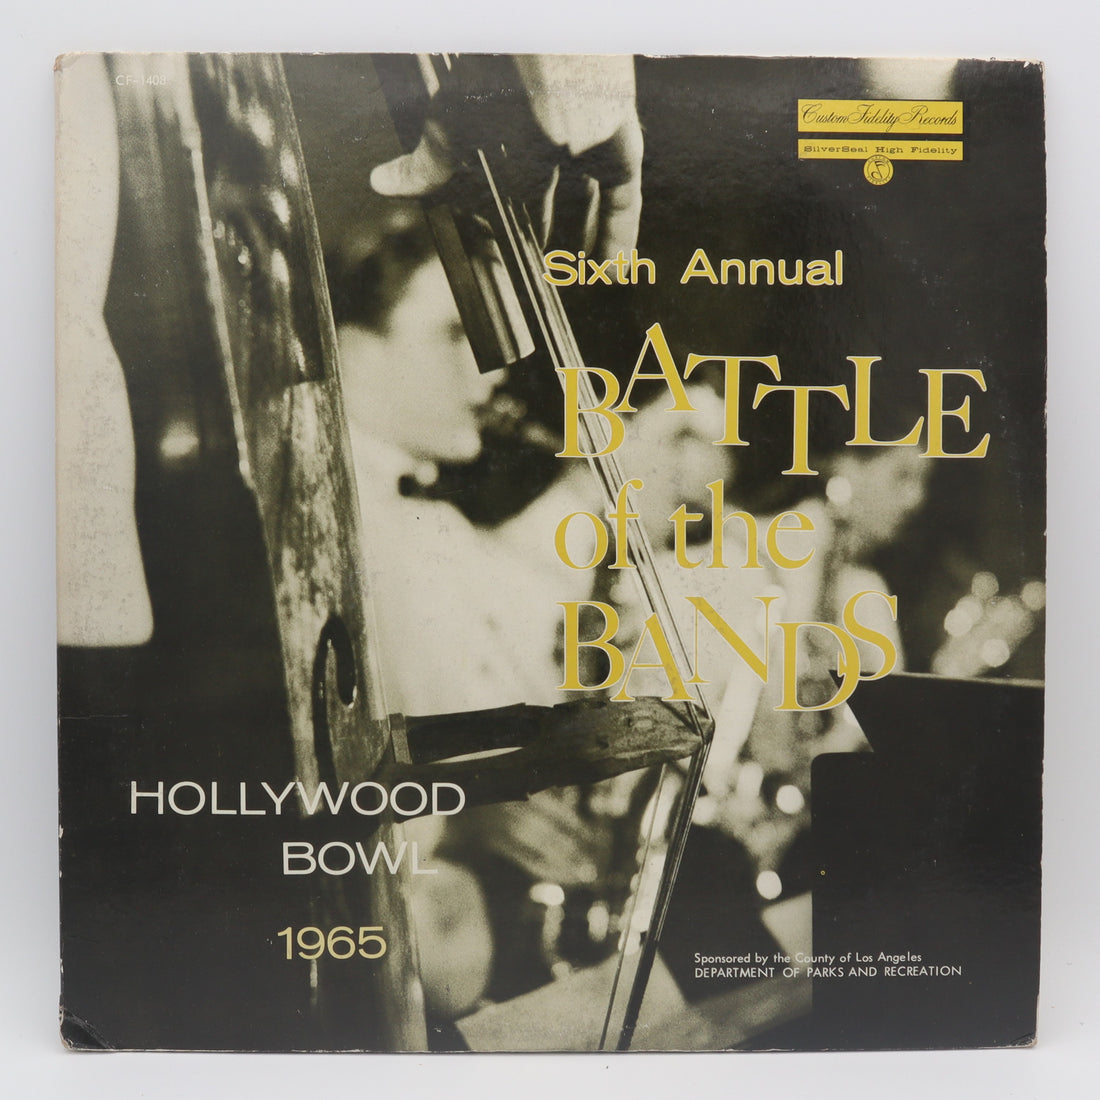 Sixth Annual Battle of the Bands: Hollywood Bowl 1965